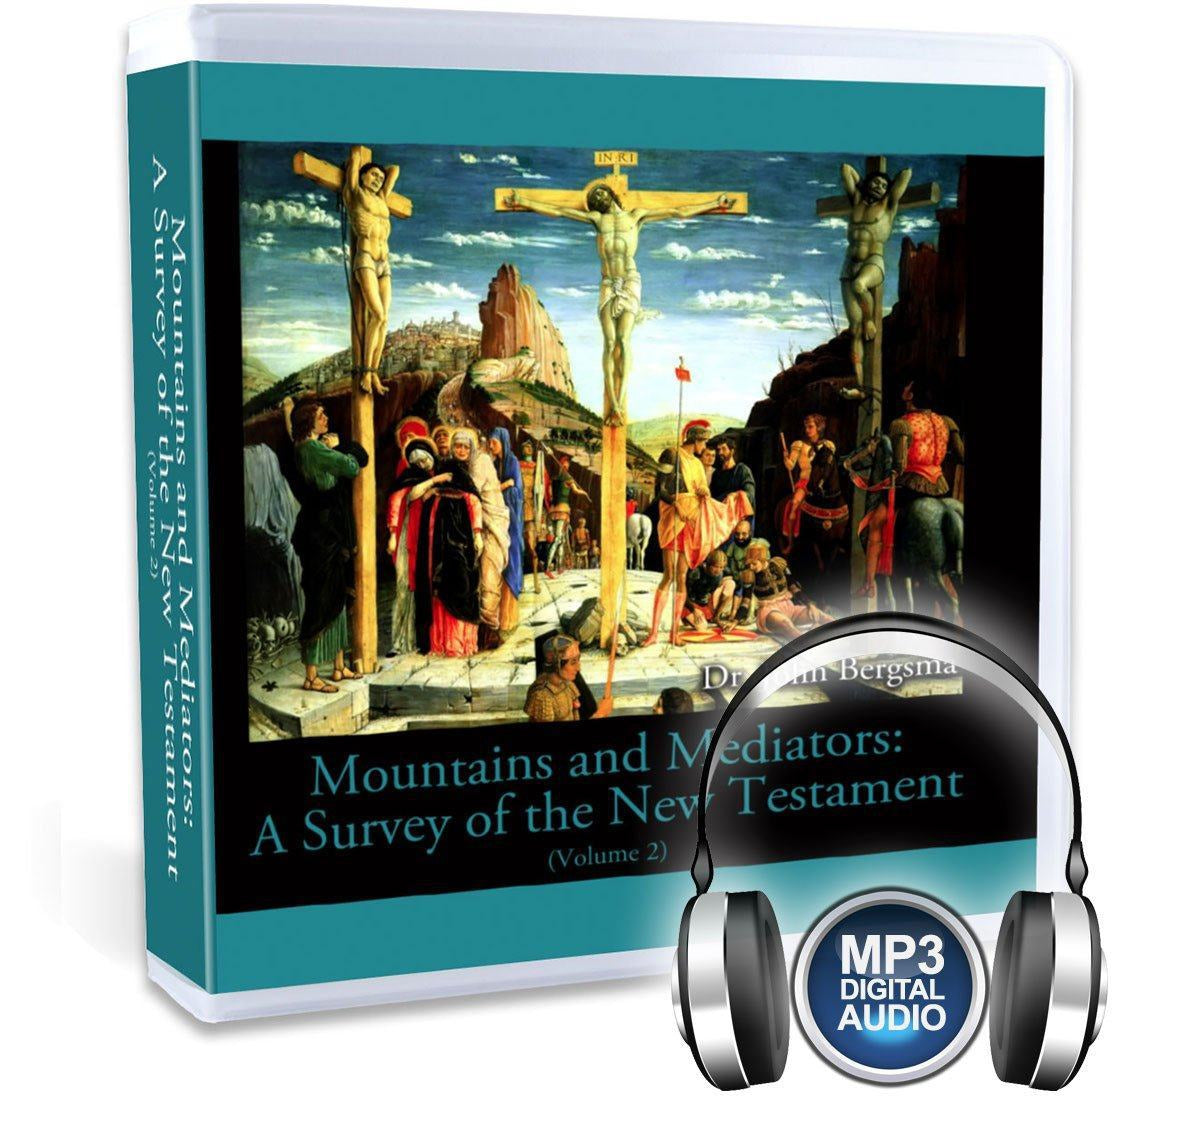 In this Catholic Bible study on CD, Dr. John Bergsma gives you a tour through the New Testament showing how the Old Testament is fulfilled in the New.